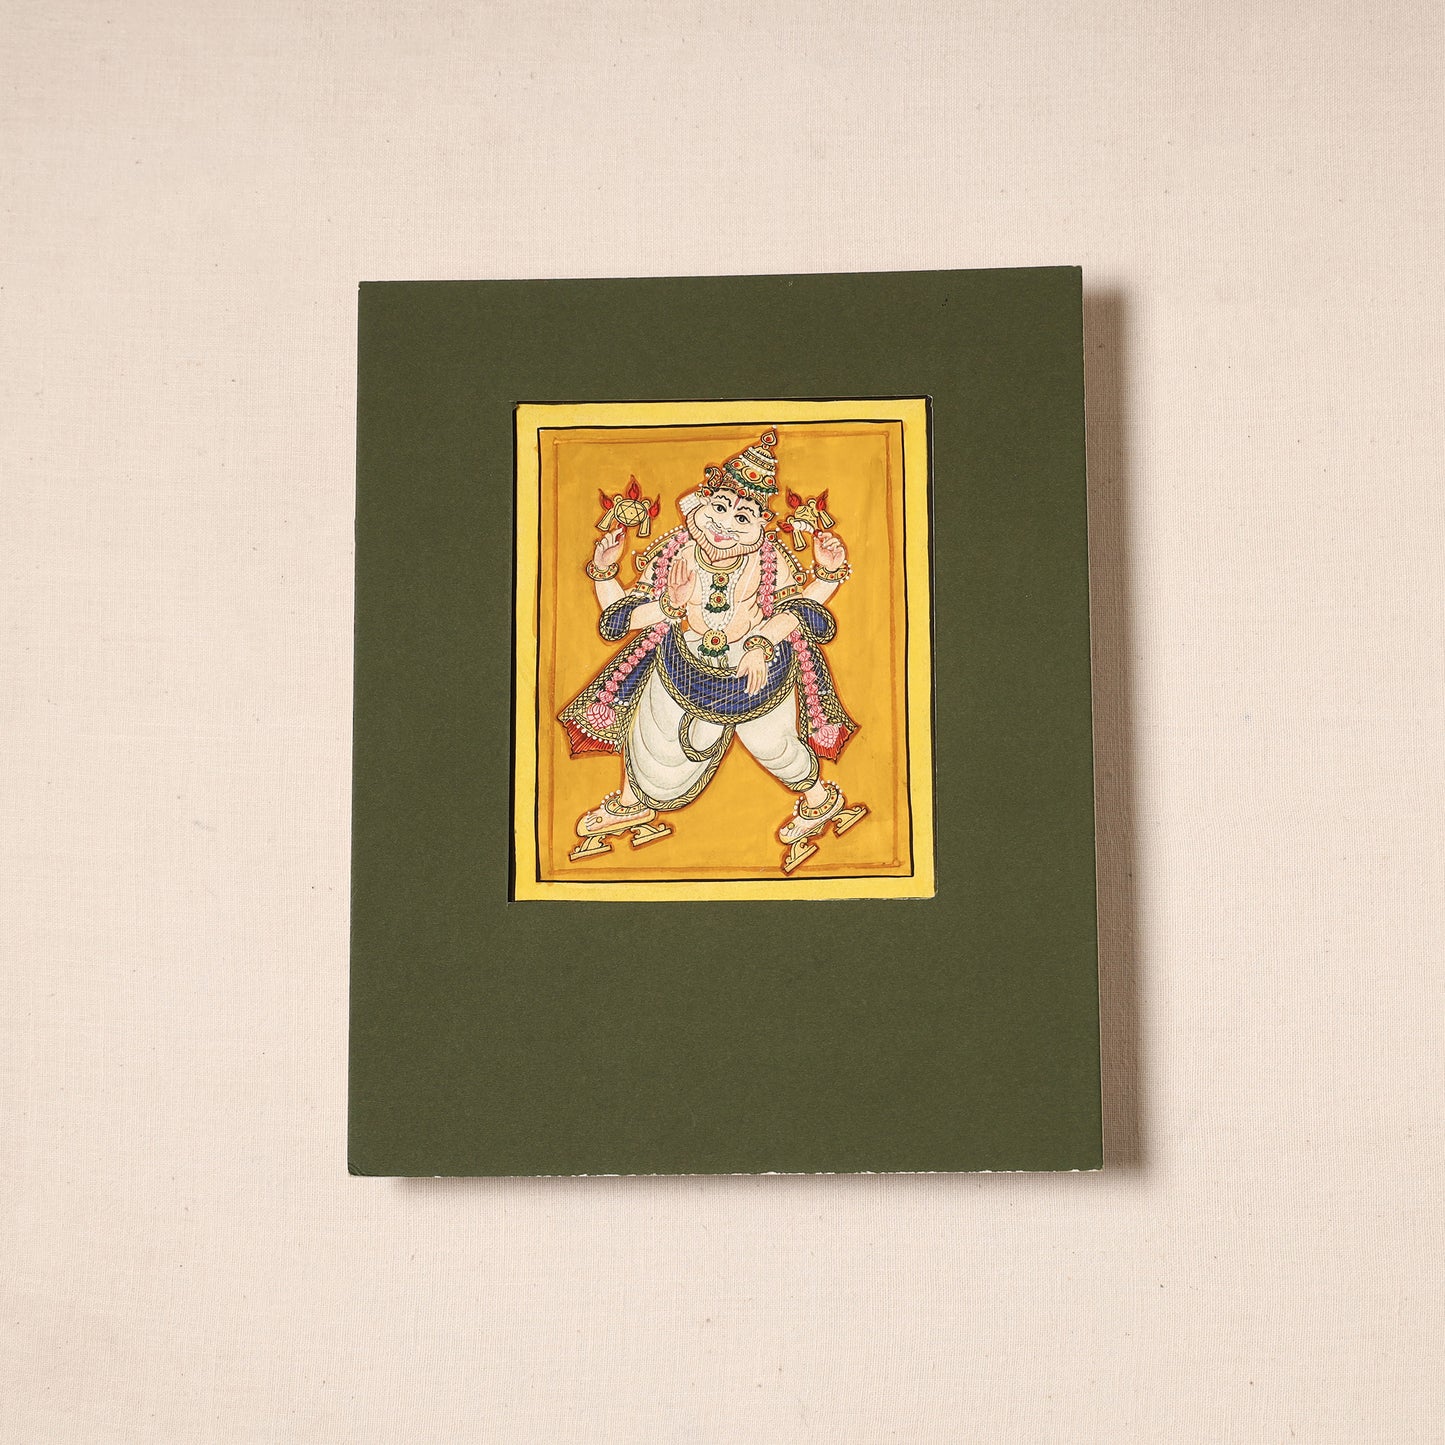 Traditional Mysore Painting by JS Sridhar Rao (10 x 9 in)